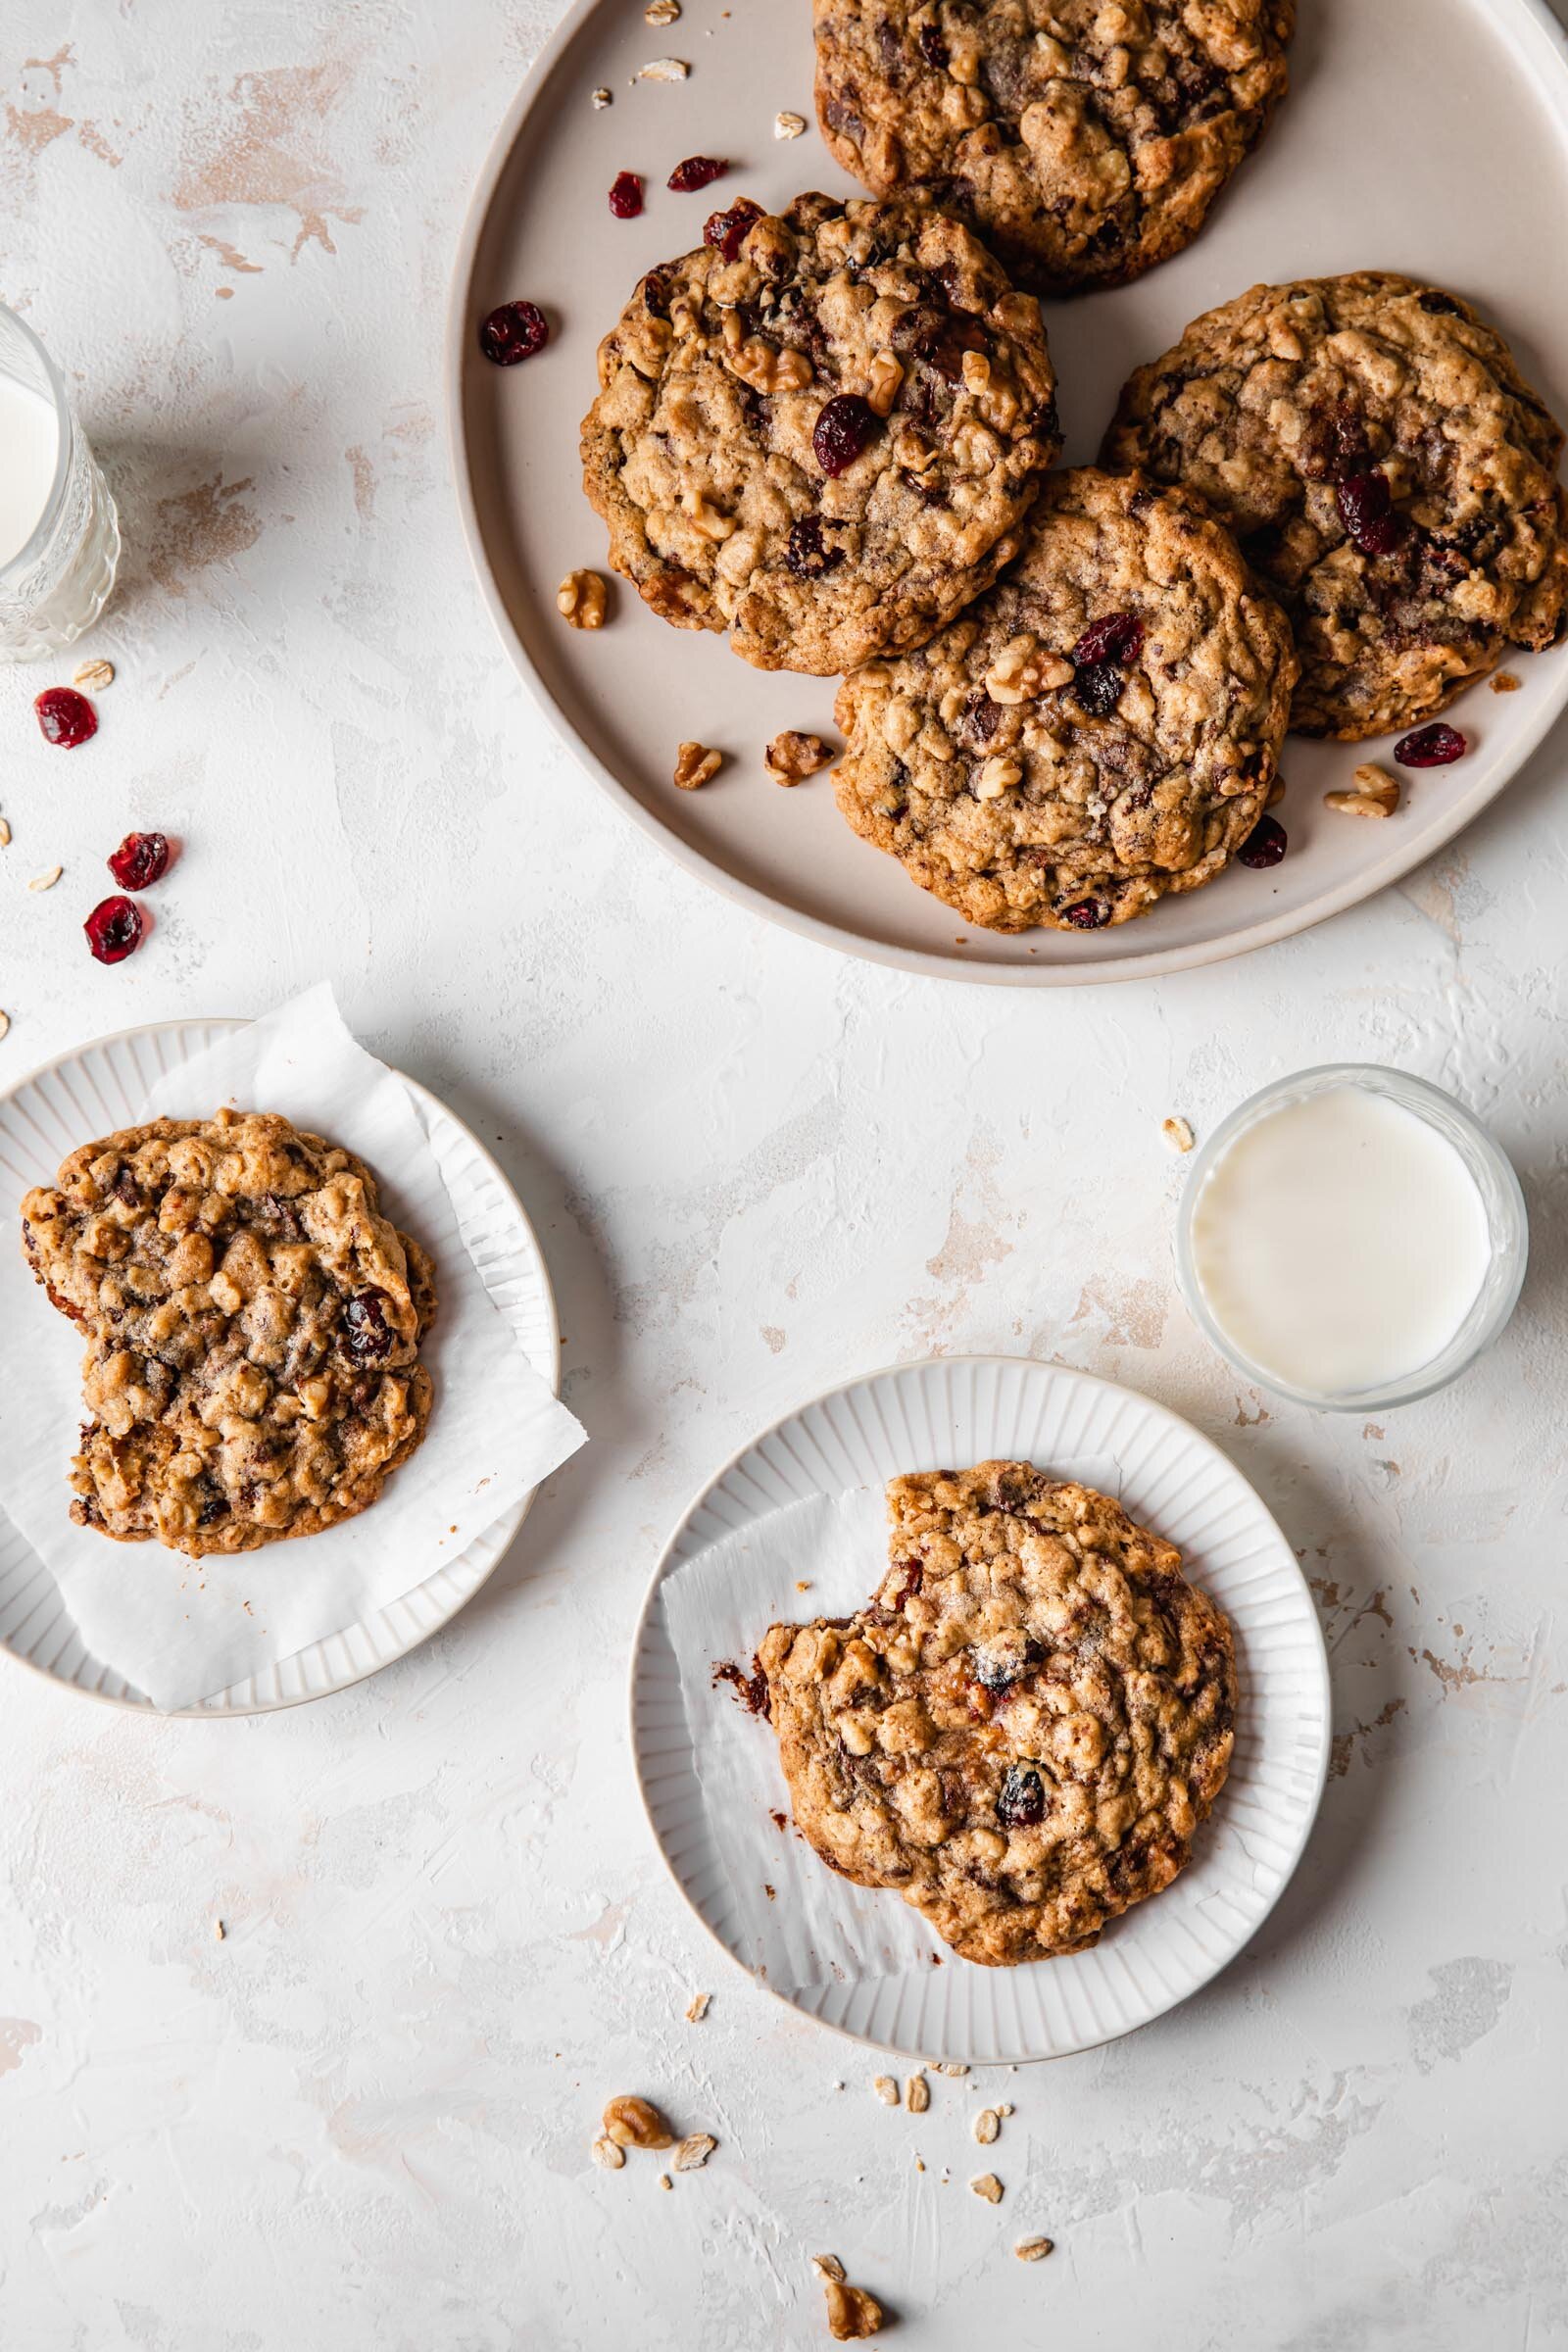 Giant Oatmeal Cranberry Cookies with dark chocolate and walnuts